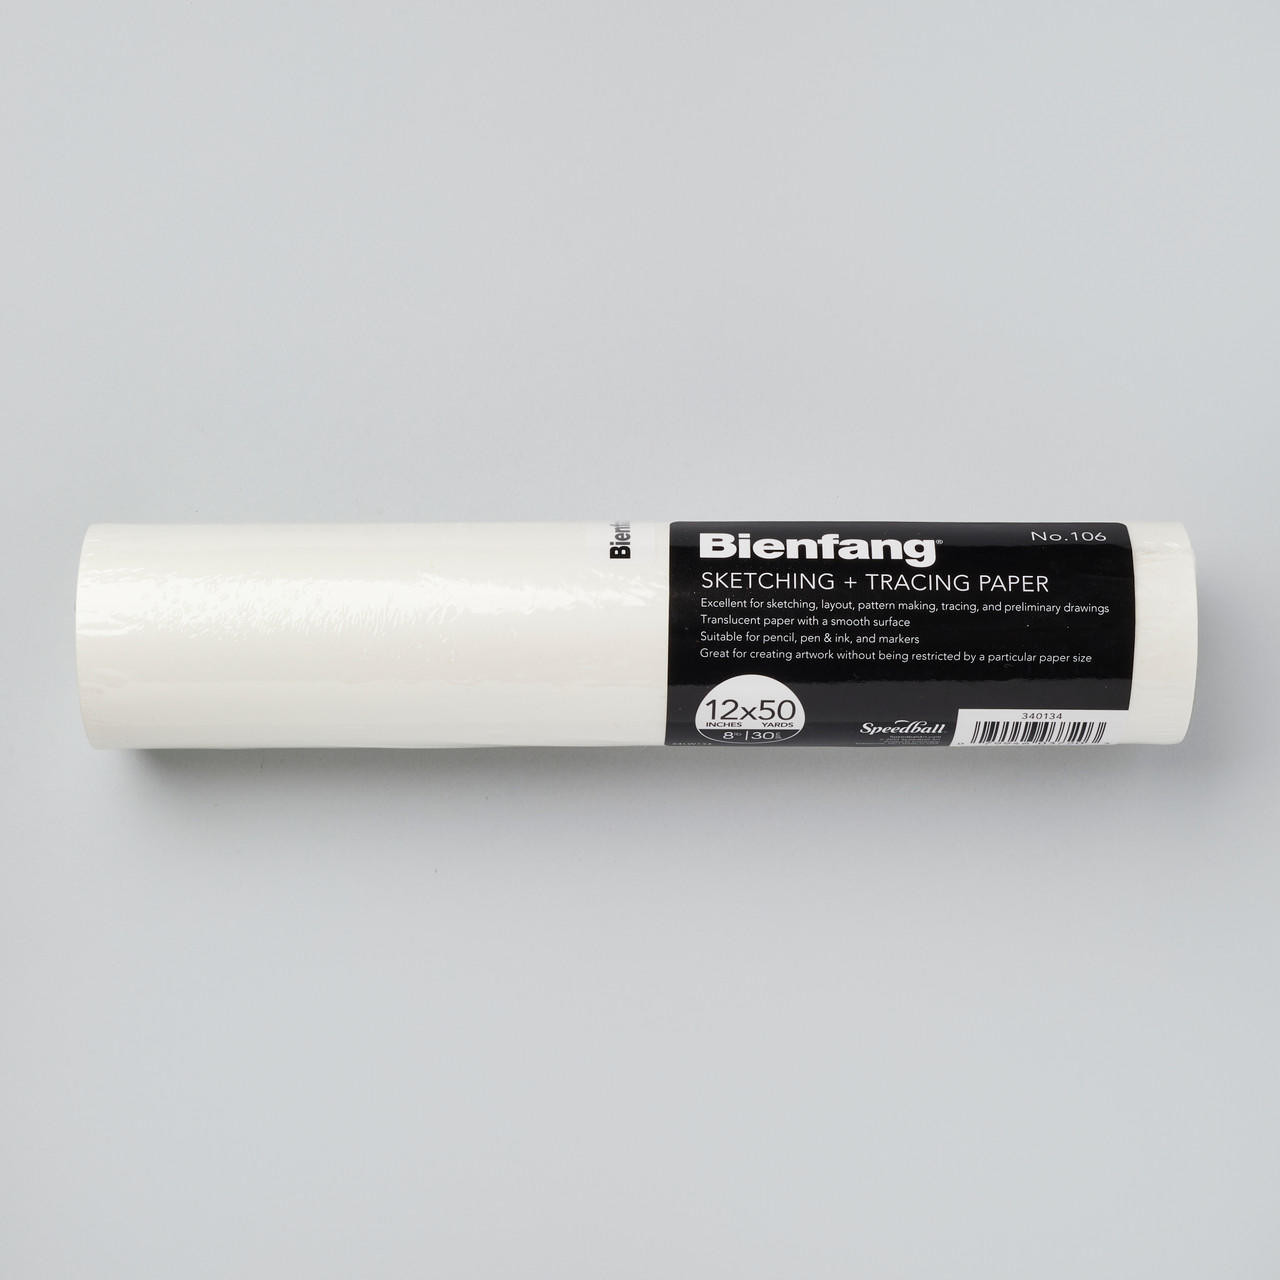 Bienfang Sketching and Tracing Paper Roll No 106 29gsm 12 inches White